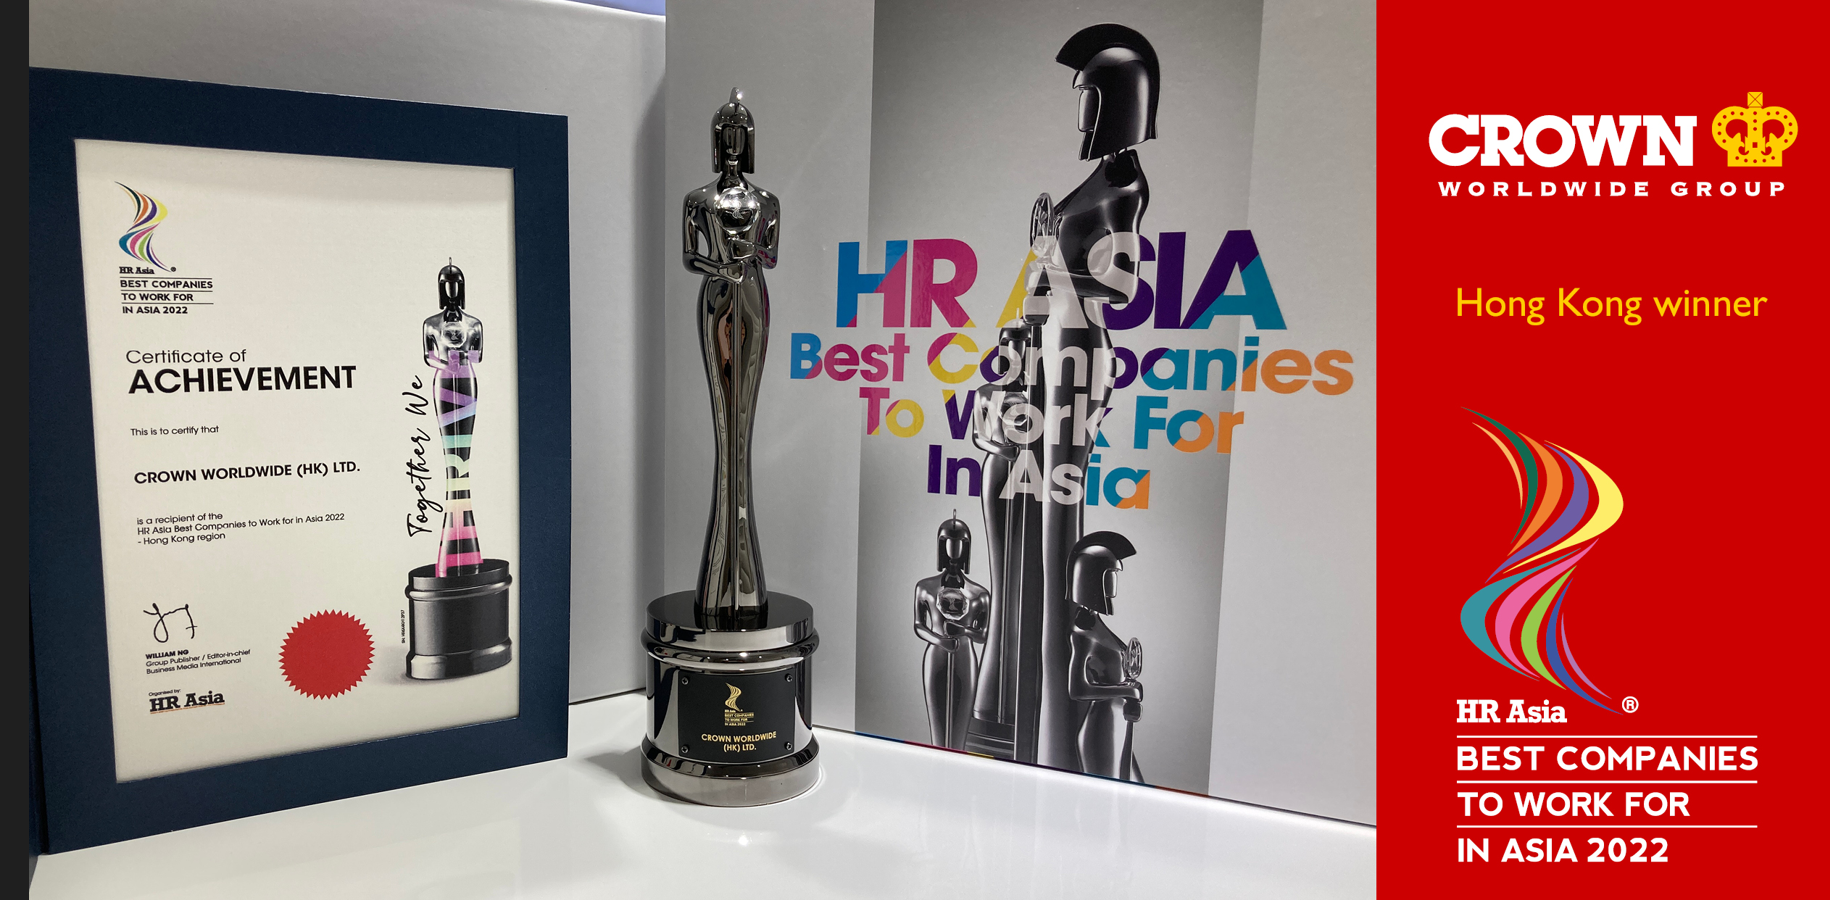 HR Asia Award trophy and certificate 